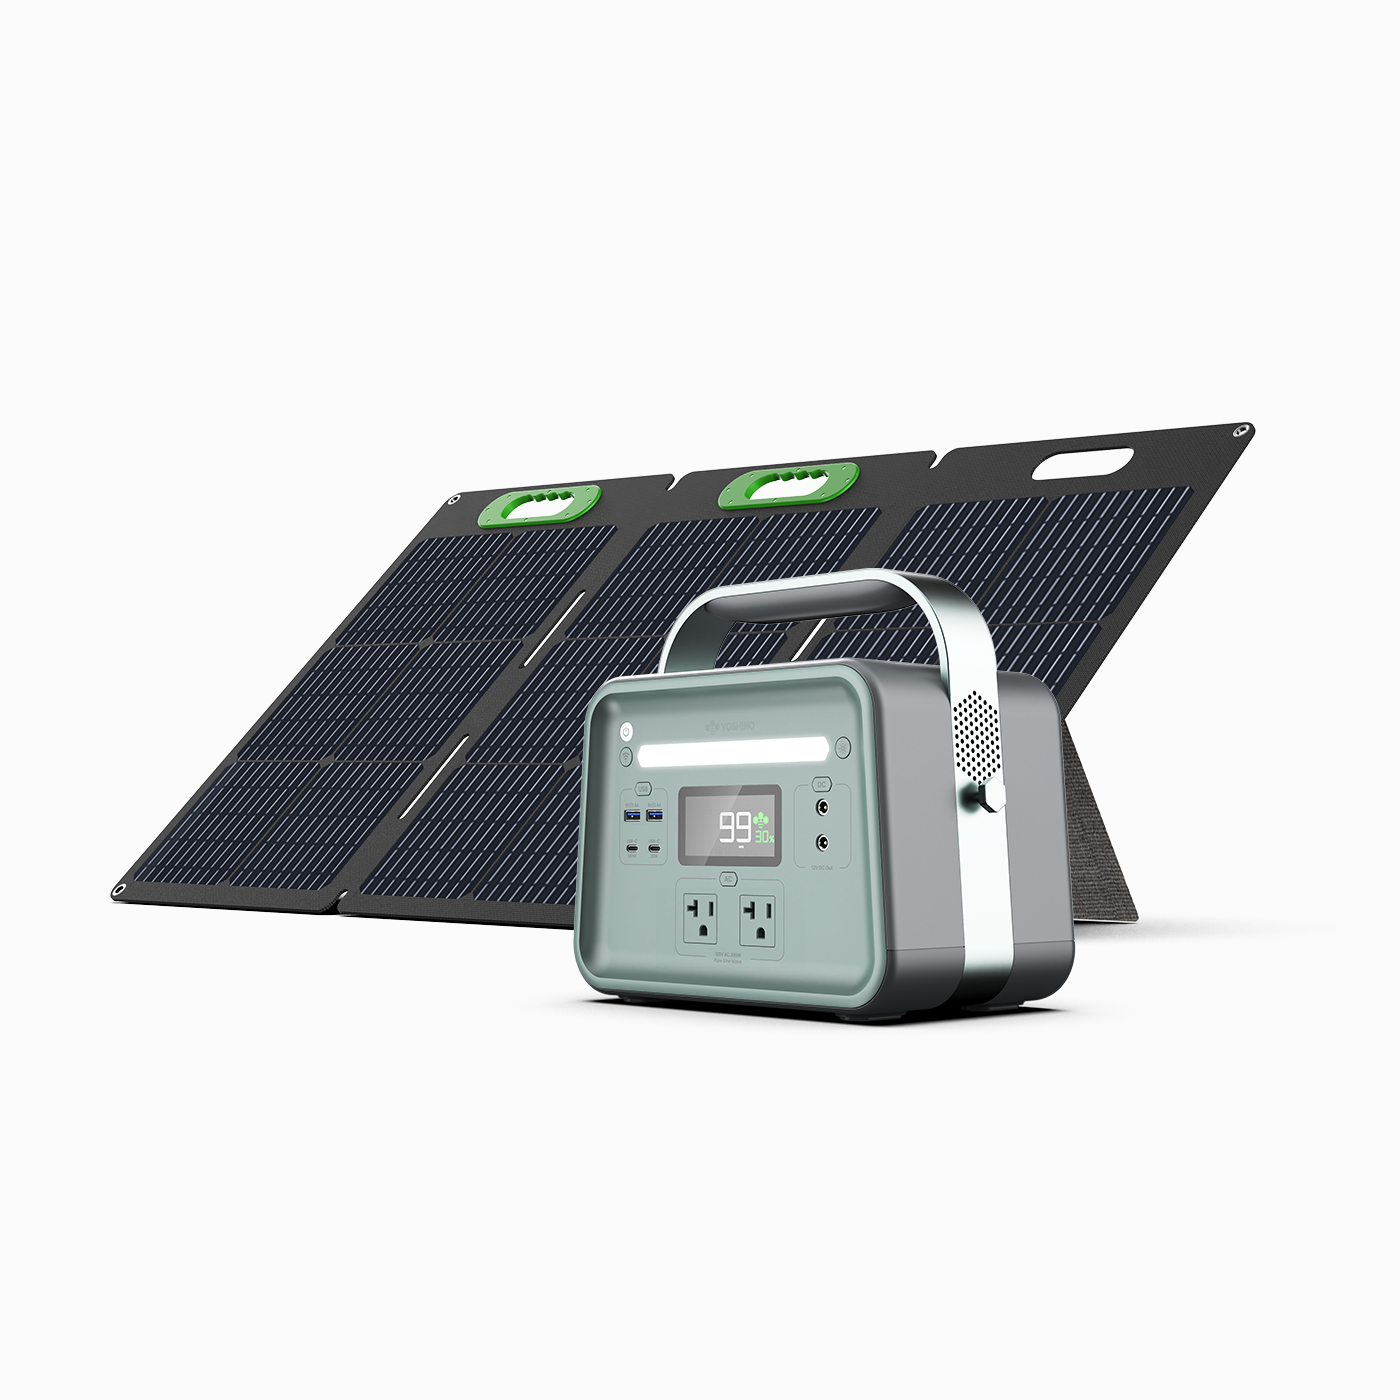 Yoshino Power K3SP11 Solid State Portable Solar Generator - Angled View